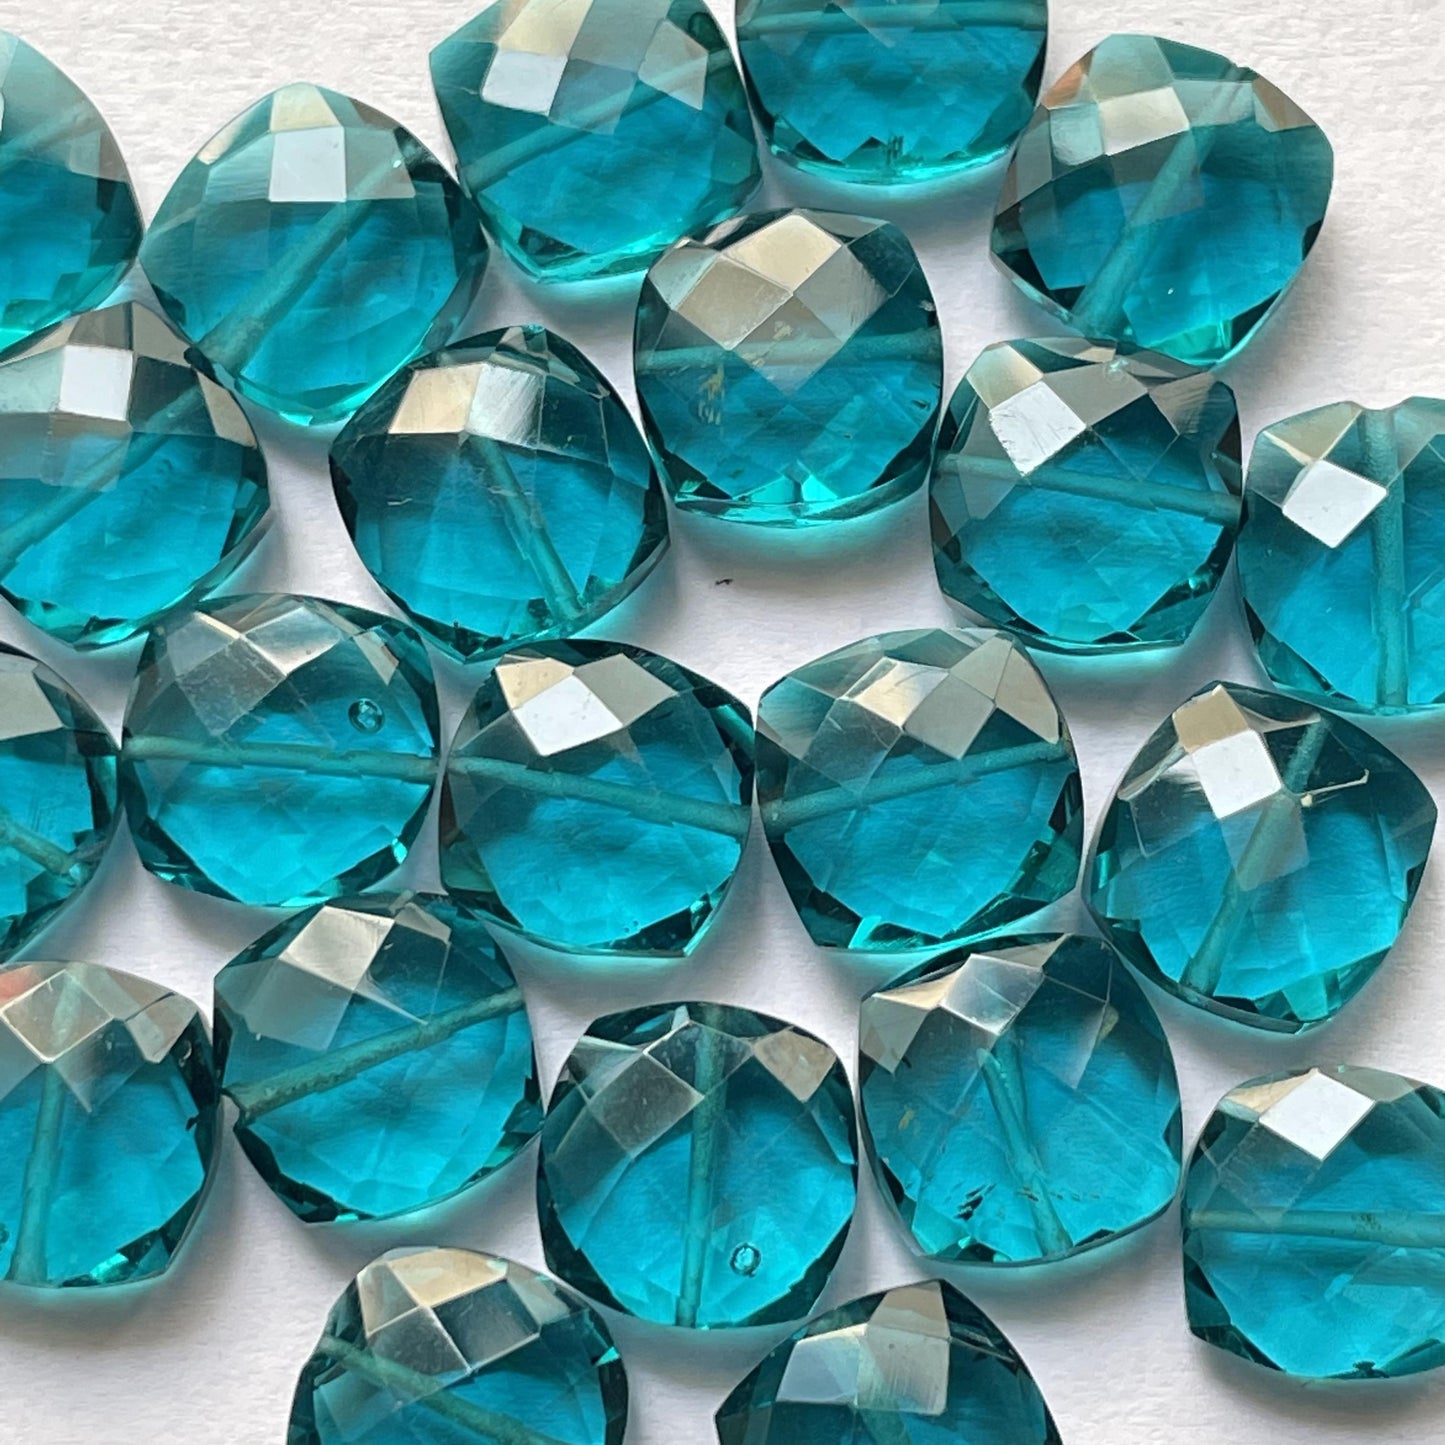 London blue topaz Faceted Nice Quality (10 mm) Cushion Shape